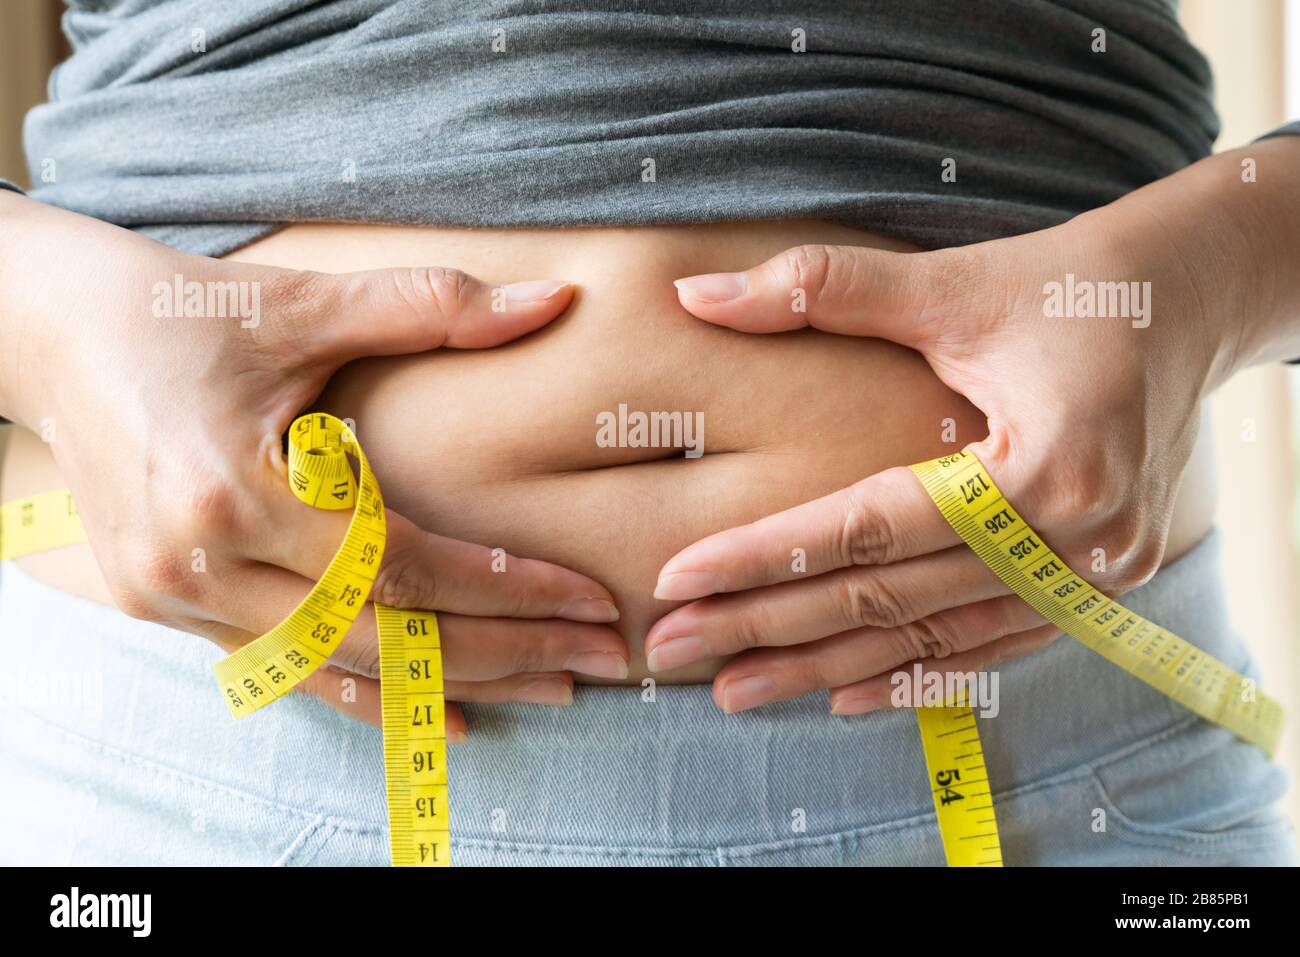 young woman's belly with measurement tape, women diet style concept Stock Photo